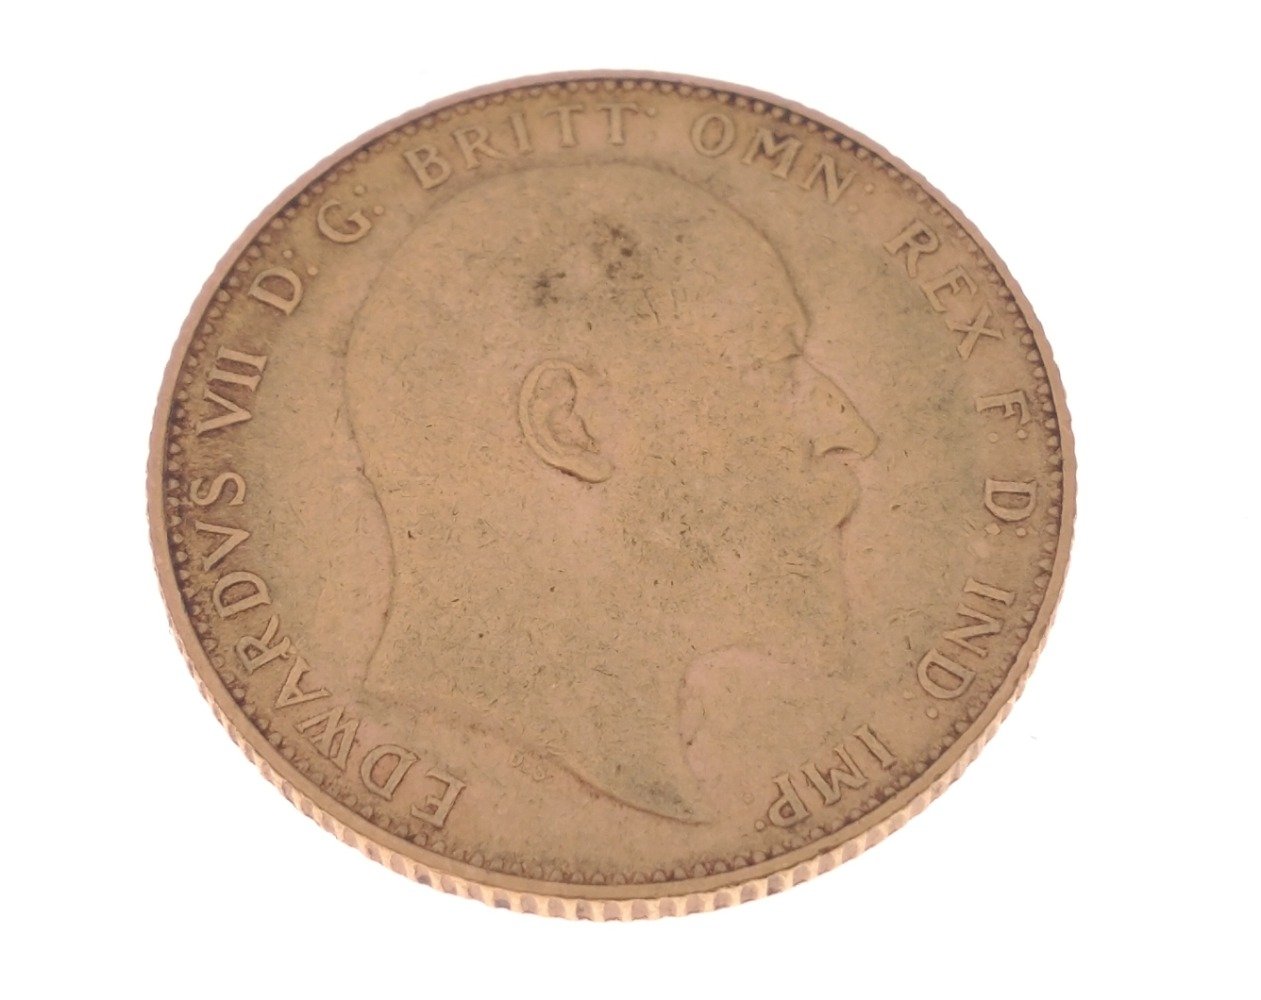 A KING EDWARD 1910 FULL GOLD SOVEREIGN in good condition - last year of his reign. - Image 2 of 2